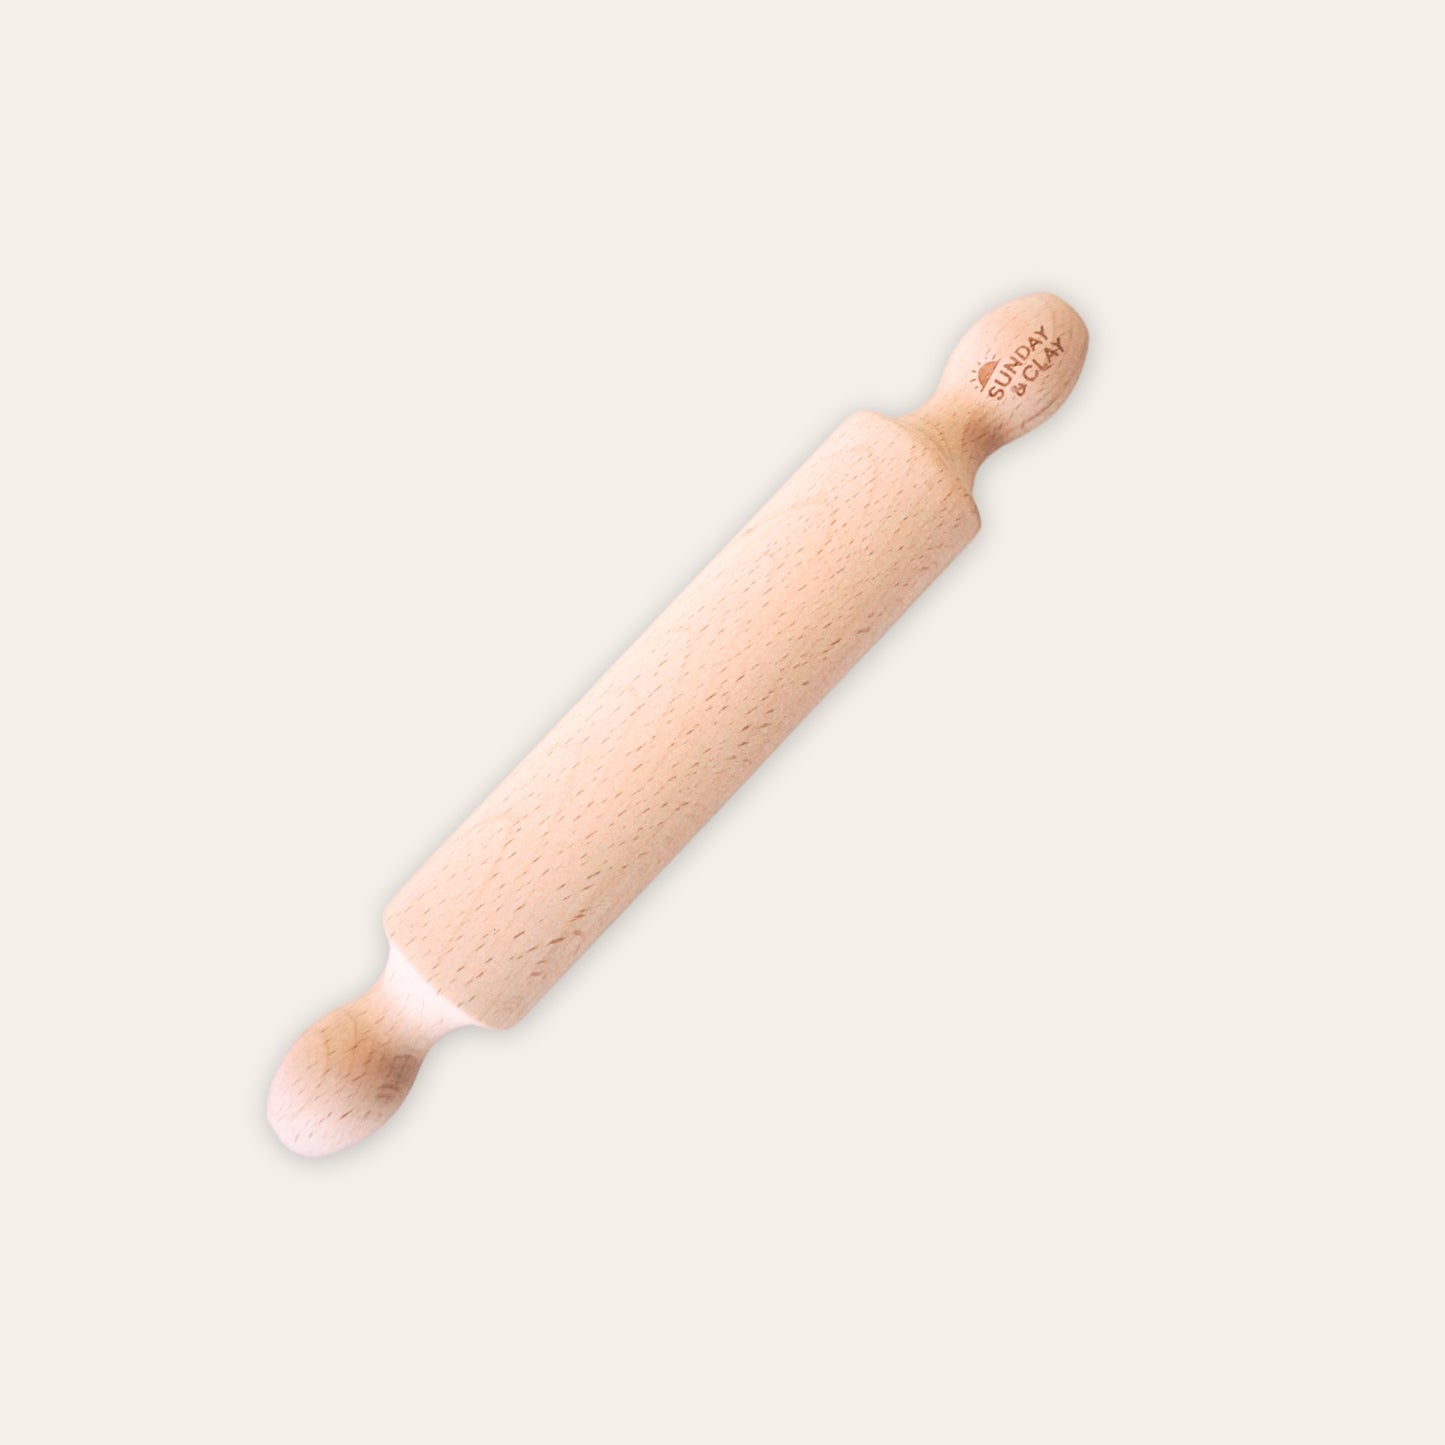 The S&C rolling pin with each clay kit.